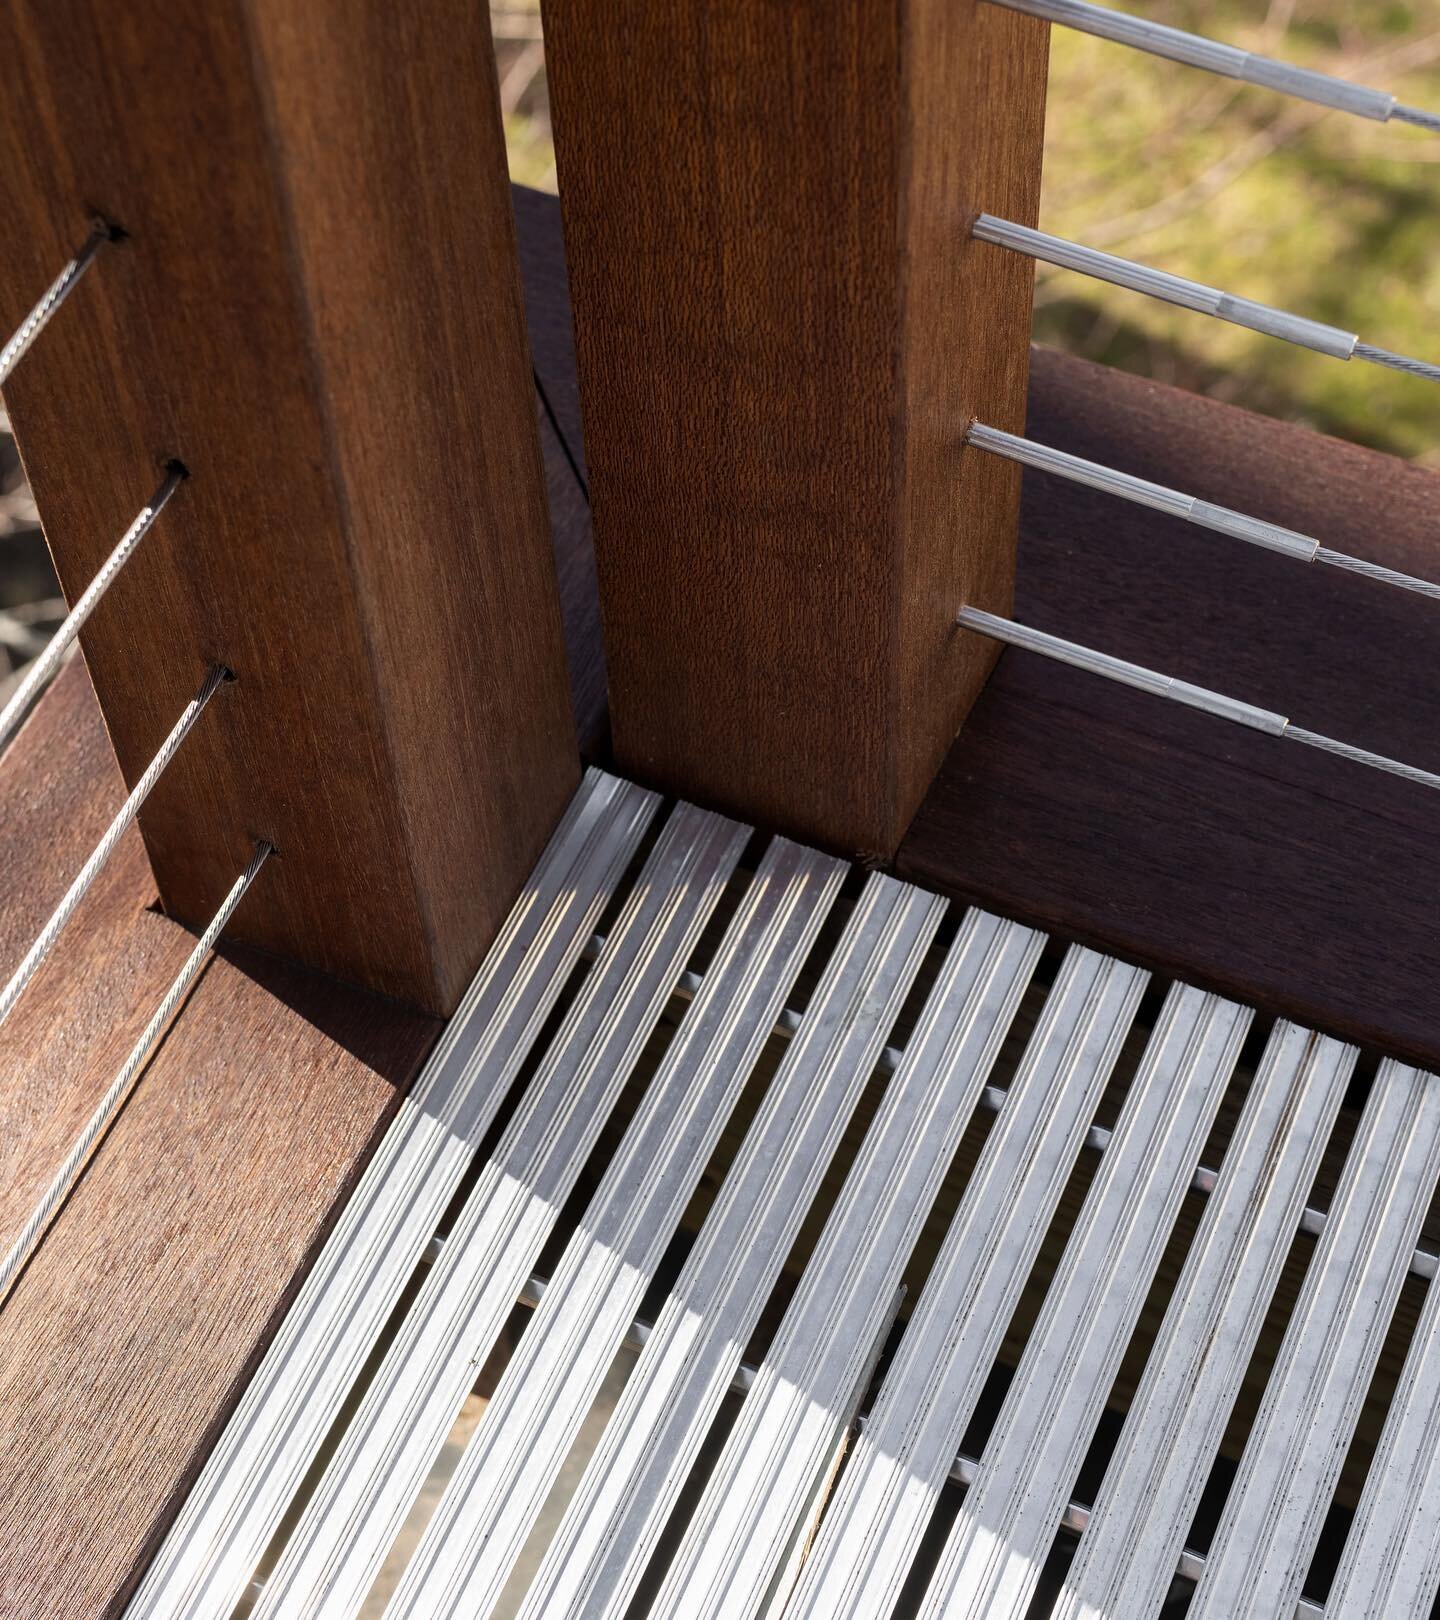 These clients wanted a material alternative to mahogany or ipe for their roof deck. Aluminum planks are easy to clean and stand up to the elements like nothing else. 
.
.
.
📸 @tamara_flanagan_photo